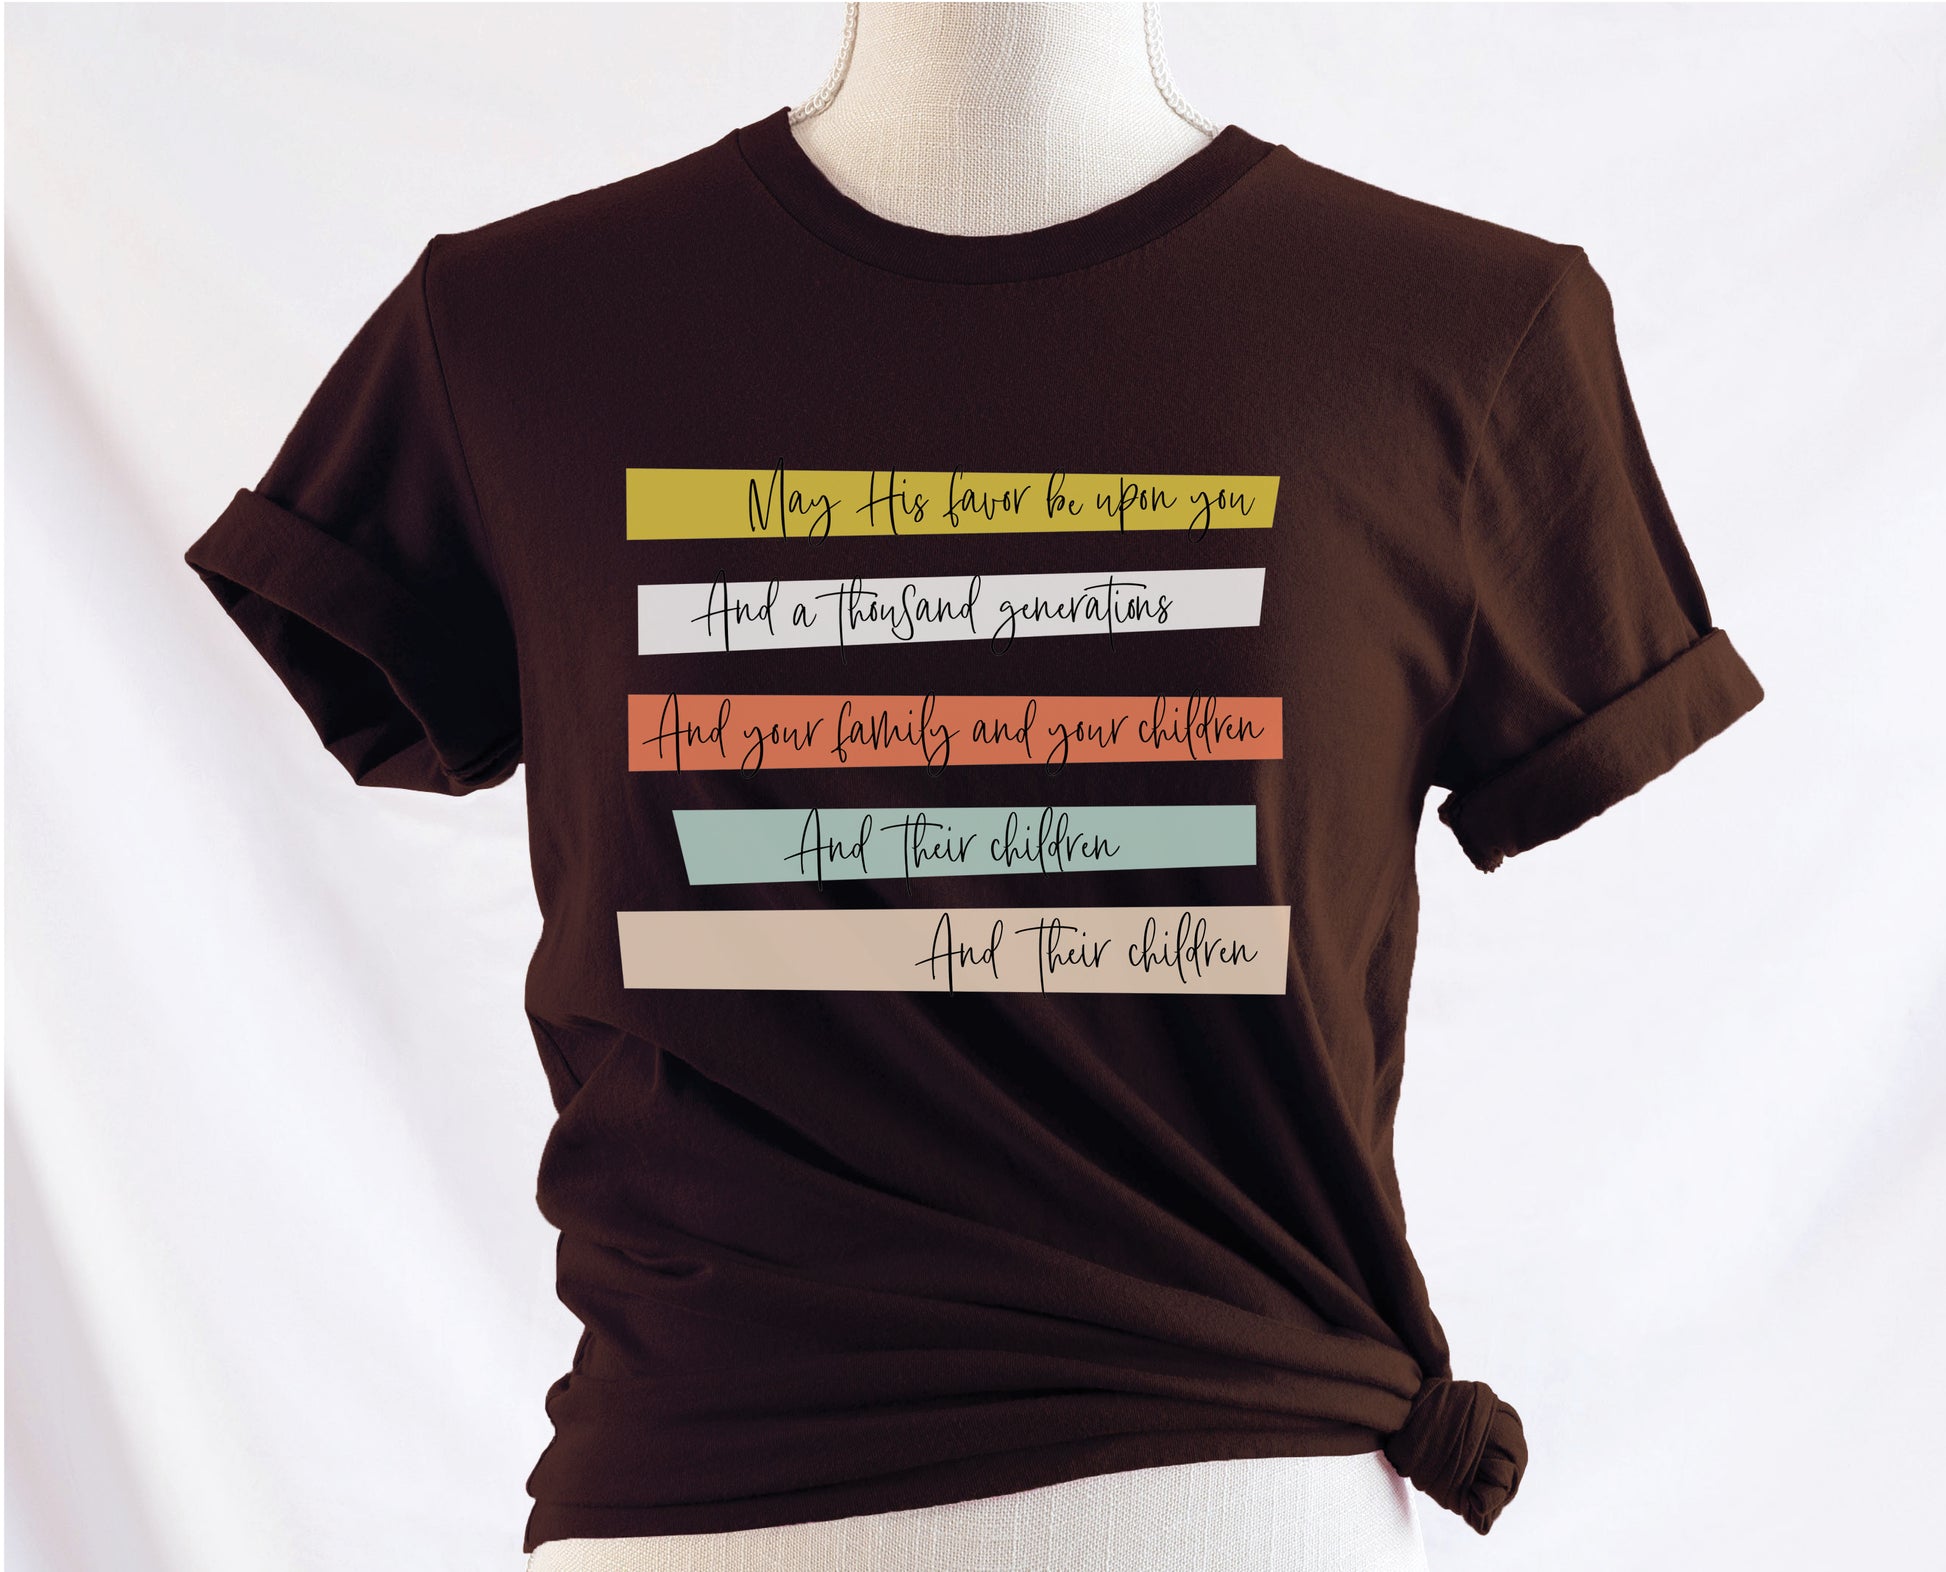 May His Favor Be Upon You and a thousand generations The Family and children Blessing Christian aesthetic 5 bars design printed on soft brown t-shirt for women